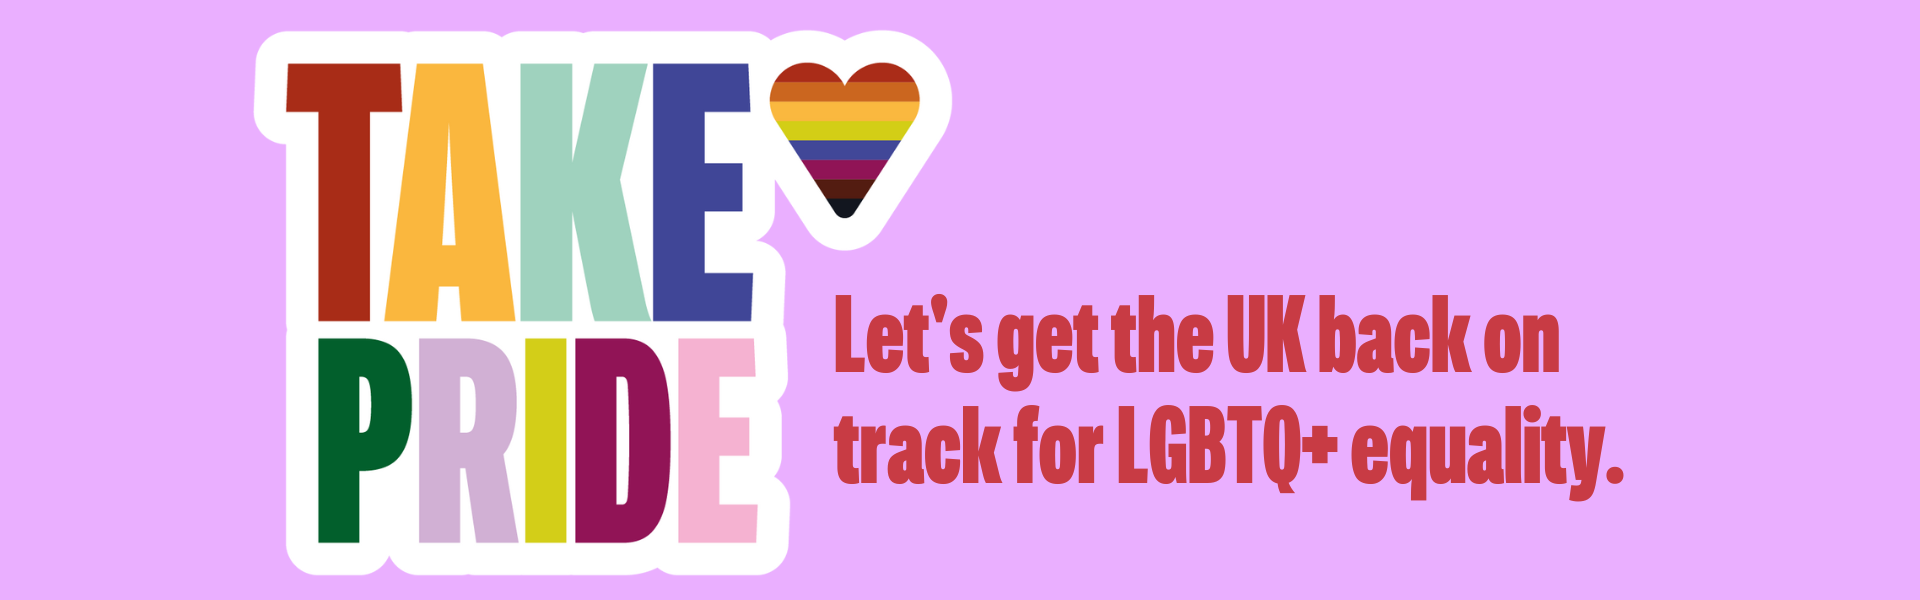 Lilac background. Rainbow 'Take Pride' logo with a rainbow heart in top right corner. Orange text reads: 'Let's get the UK back on track for LGBTQ+ equality.'